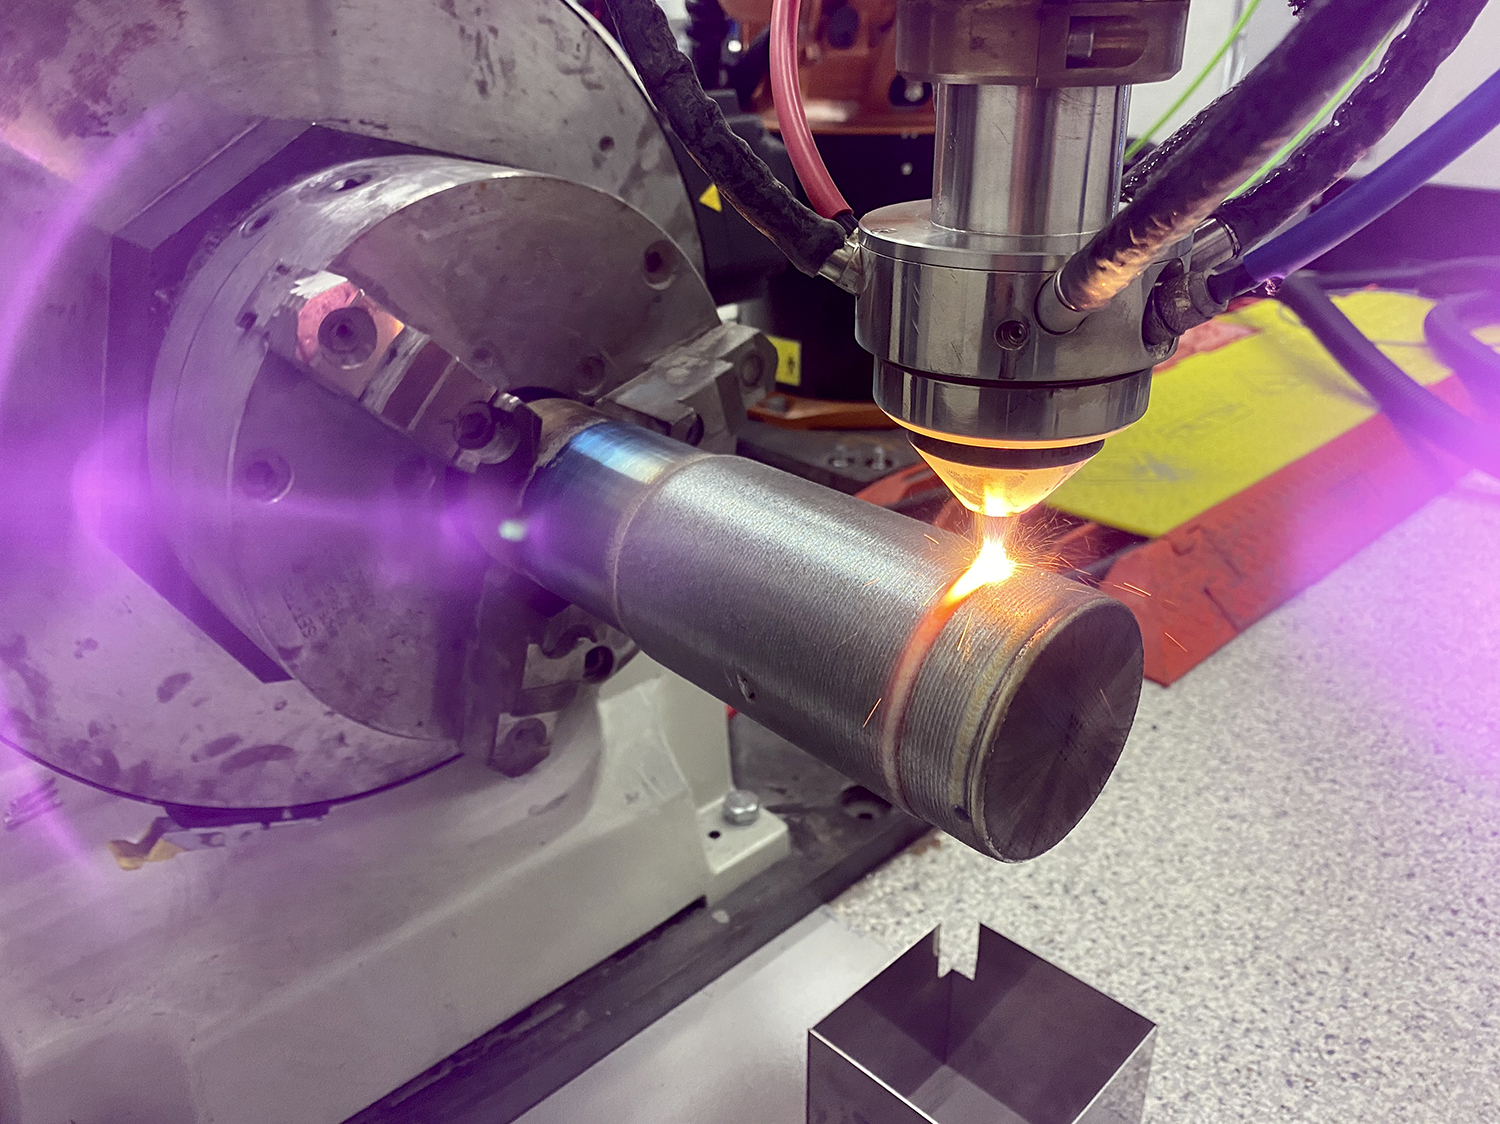 Laser metal deposition (LMD) is a repair technique that can be used for the restoration of many components used in rotating equipment similar to methods like conventional welding and high velocity oxidized fuel (HVOF).